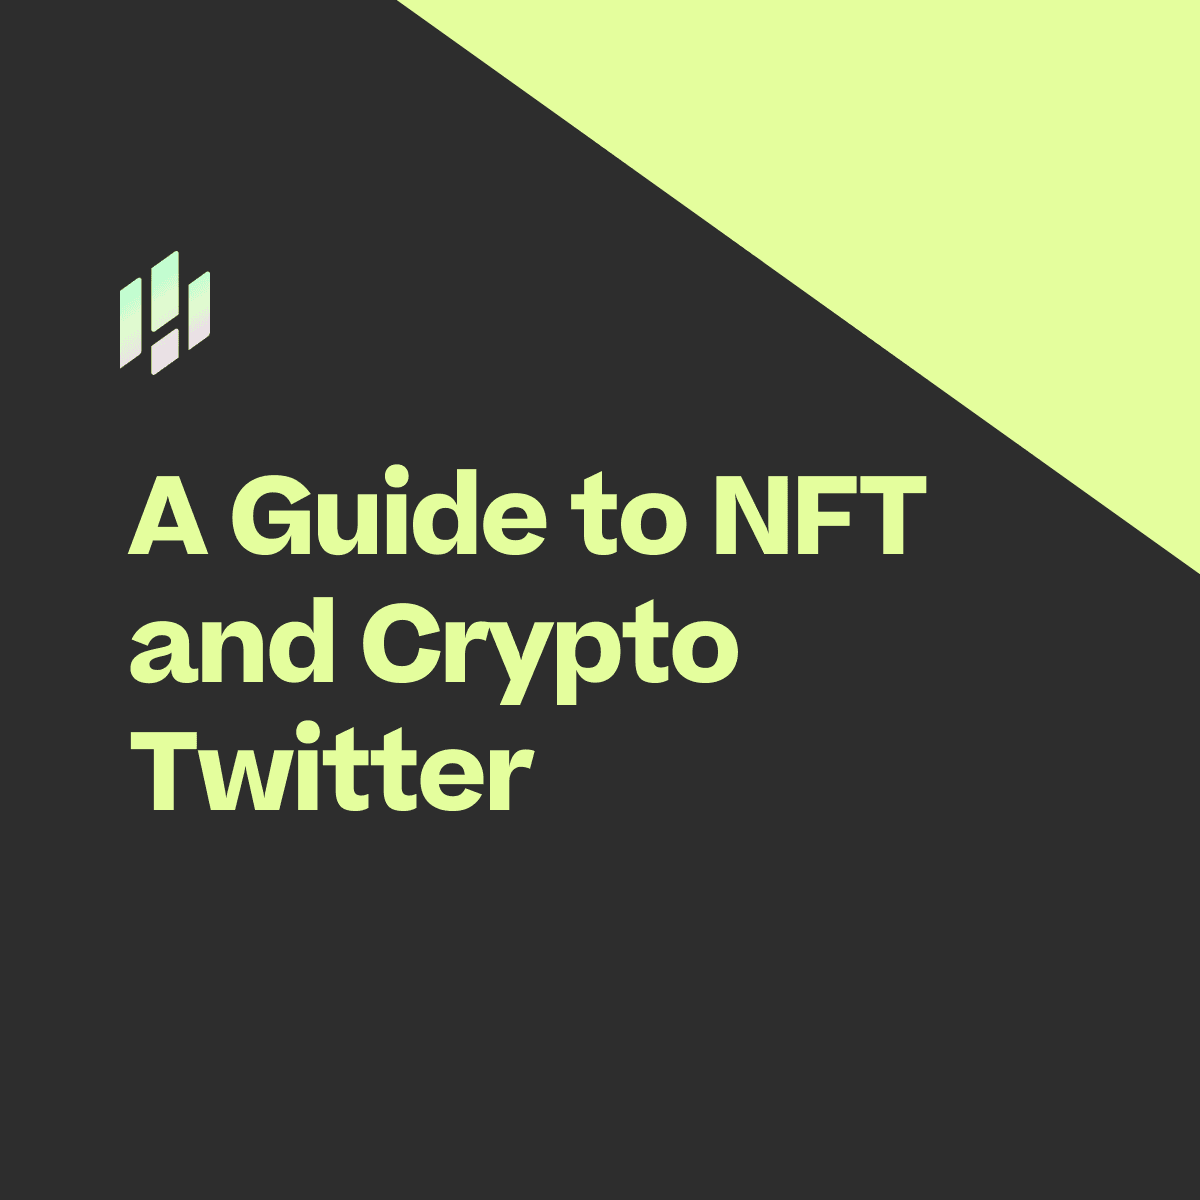 A Guide to NFT and Crypto Twitter